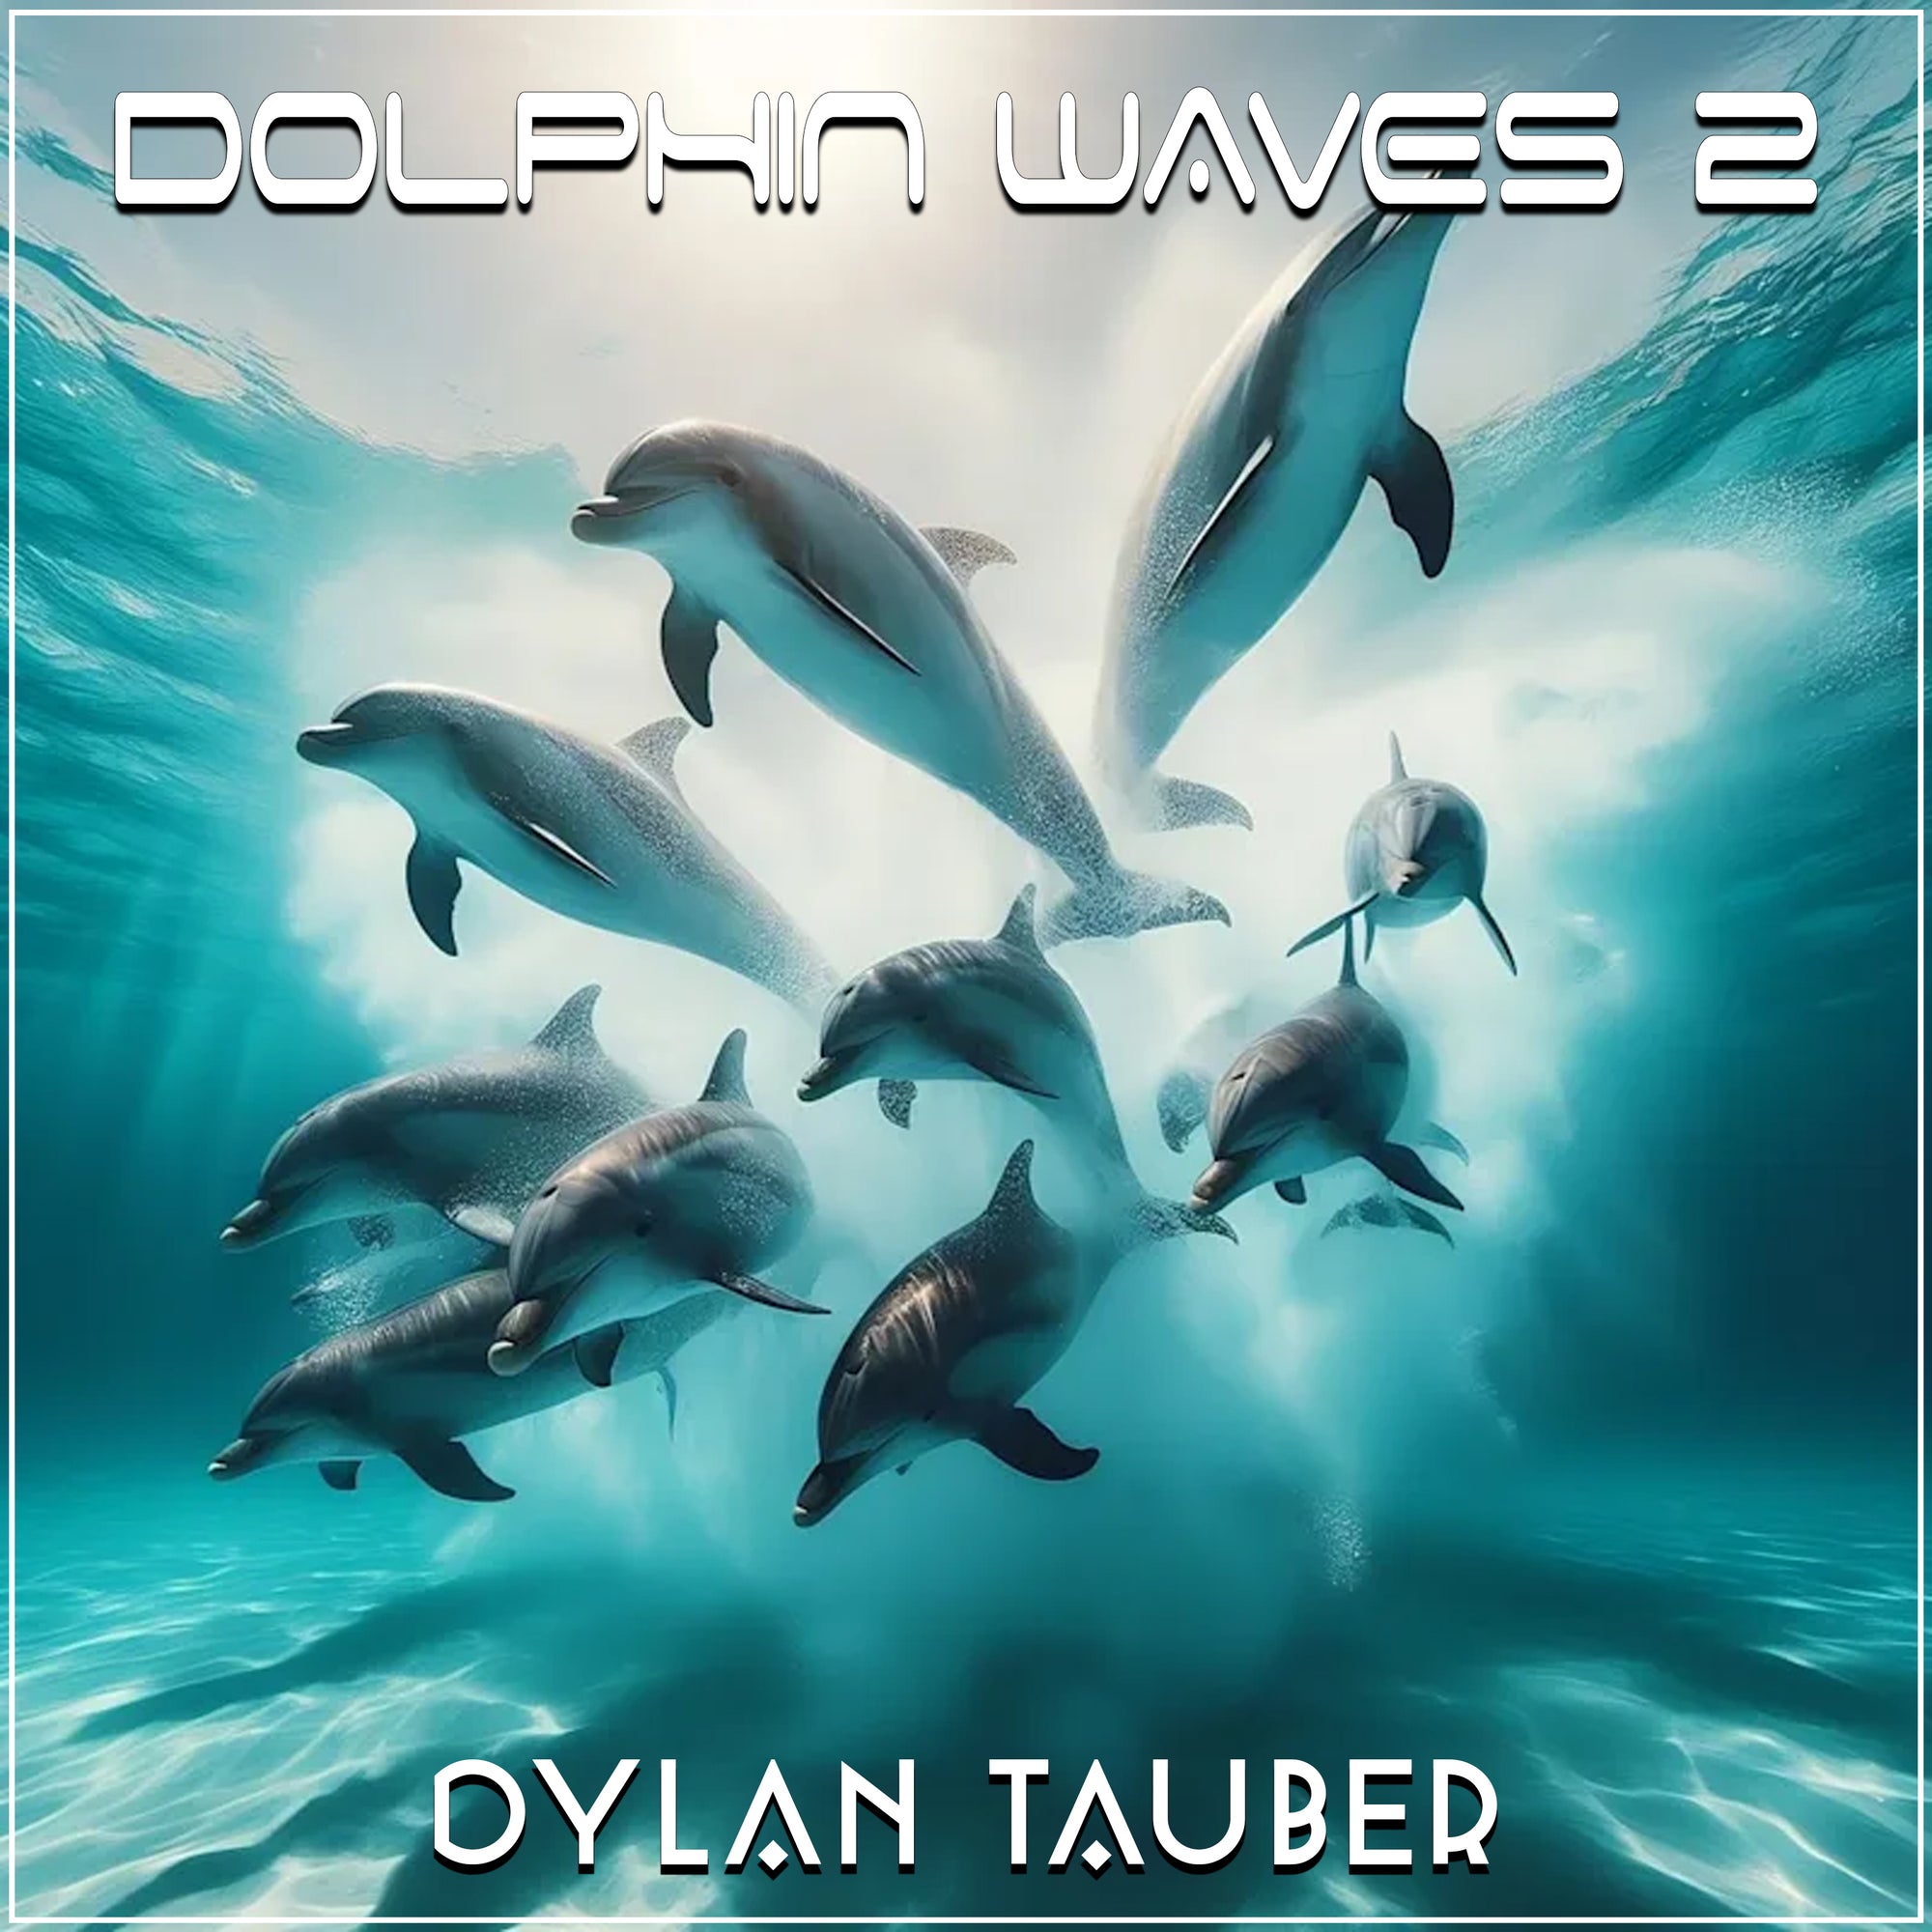 Dylan Tauber continues his exploration of electronic music with new album ‘Dolphin Waves 2’